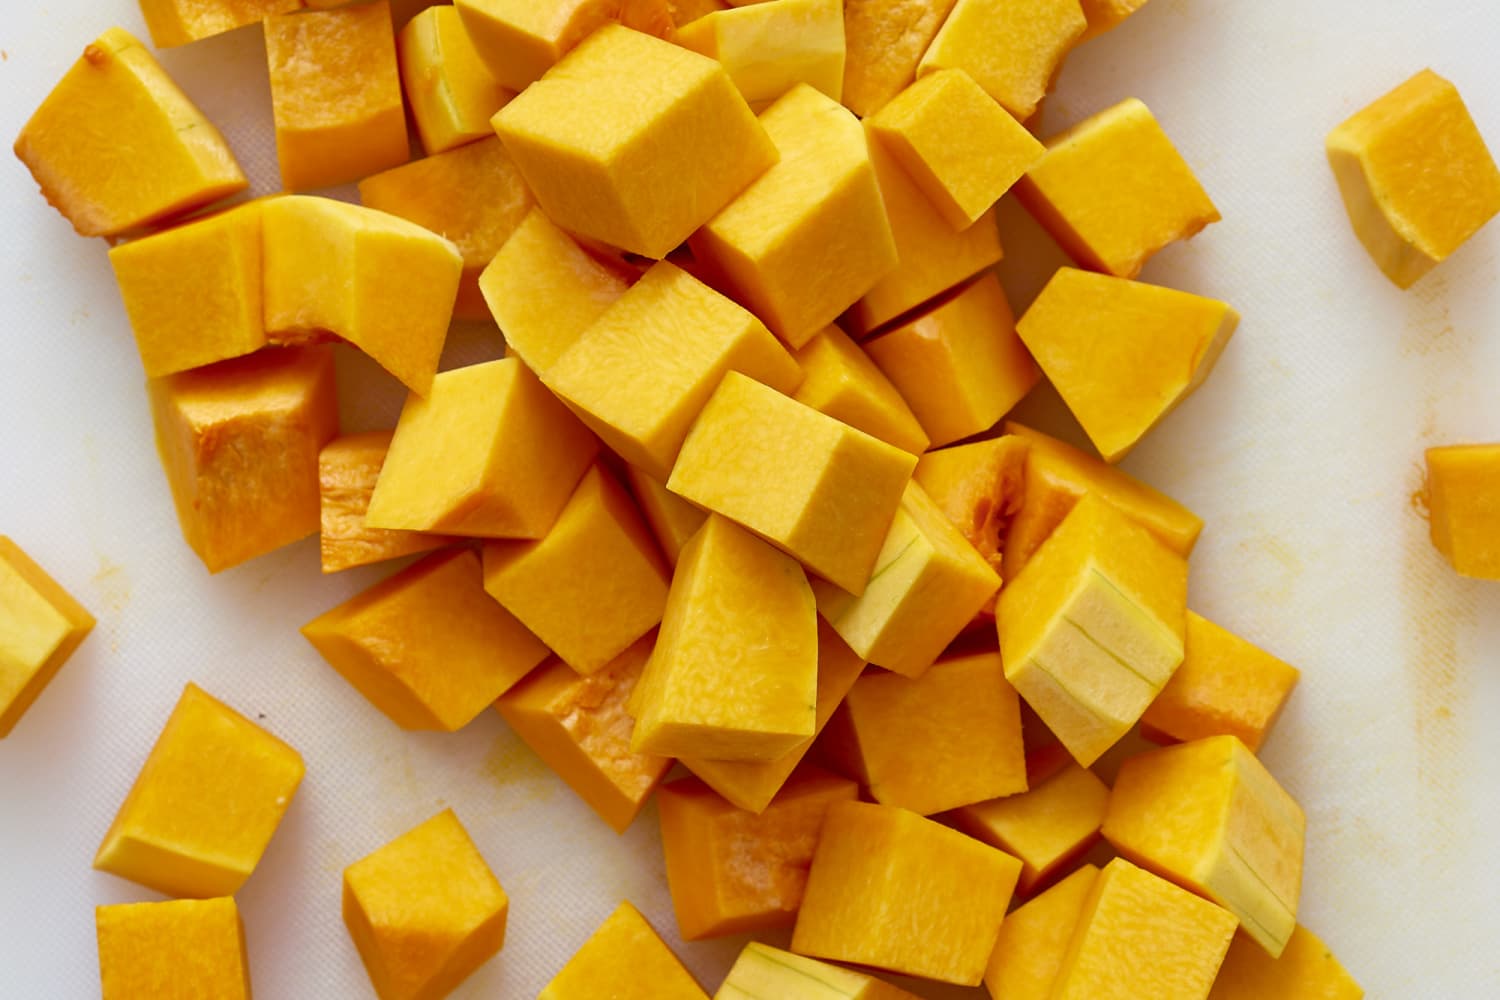 How To Cut Butternut Squash (A Step-By-Step Guide) | The Kitchn